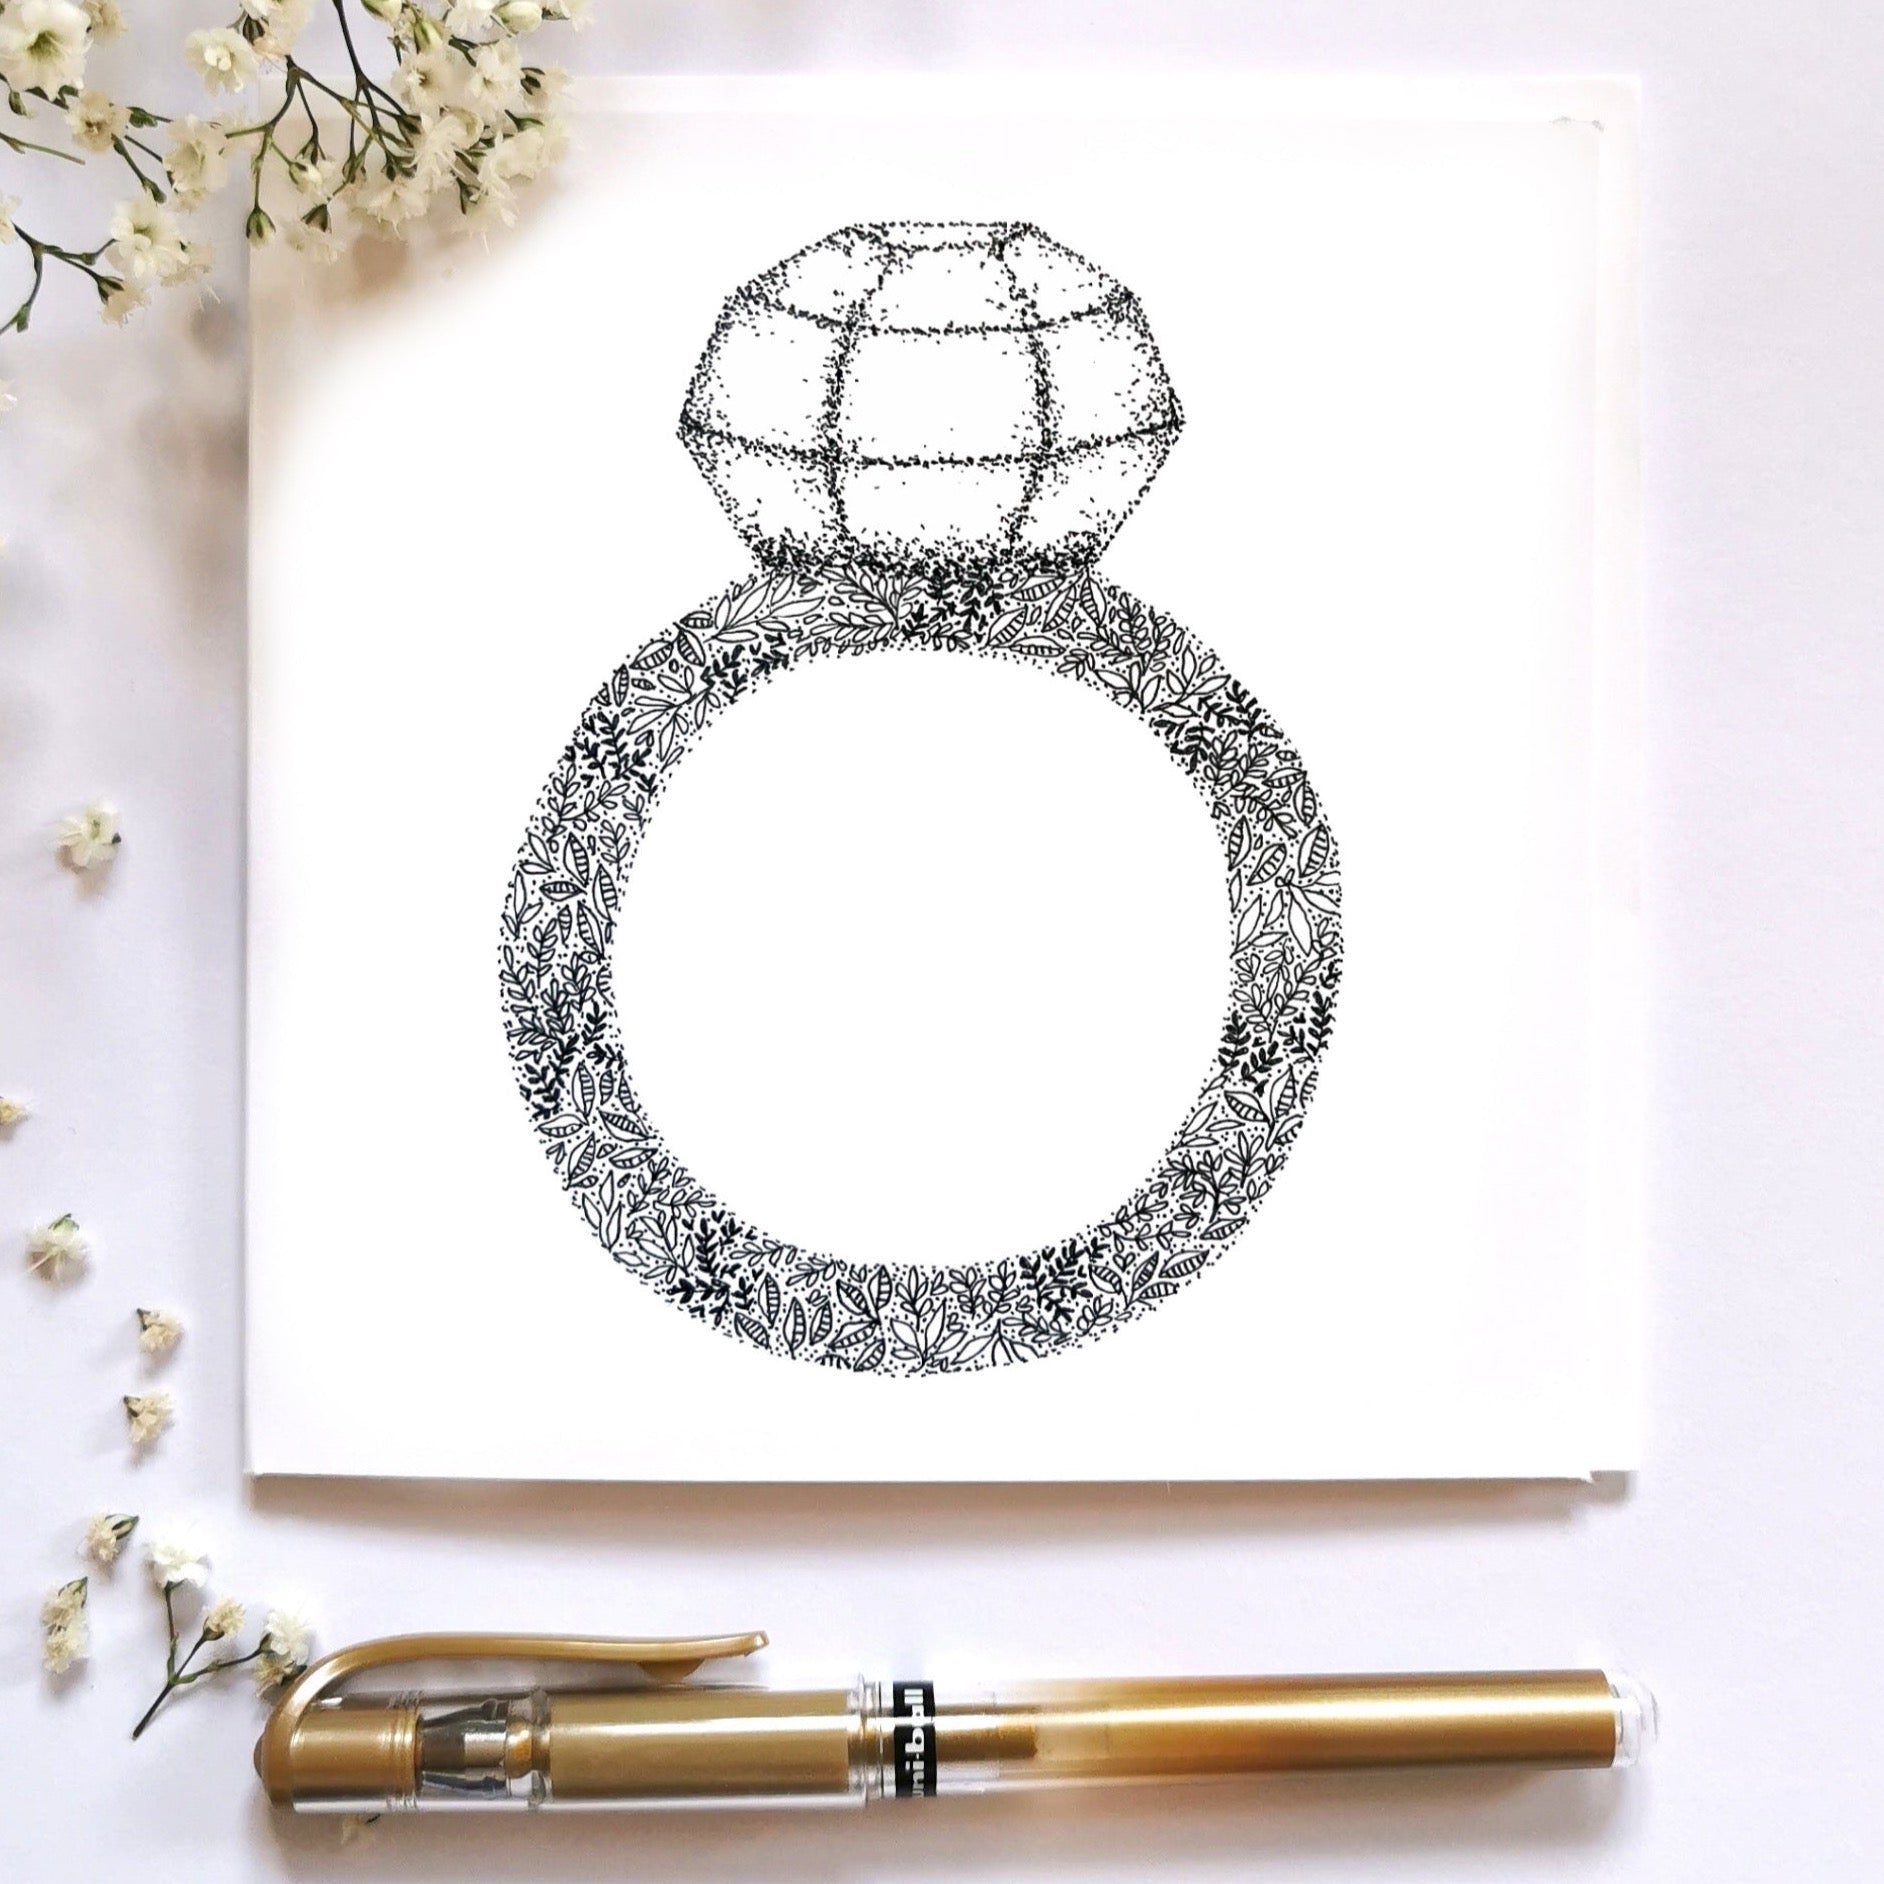 Image shows drawing of a Diamond ring drawn from flowers and black and white dots. the diamond is made entirely from different sized dots. image is laid on a cream surface with arrangements surrounding it to show the image dressed up. 